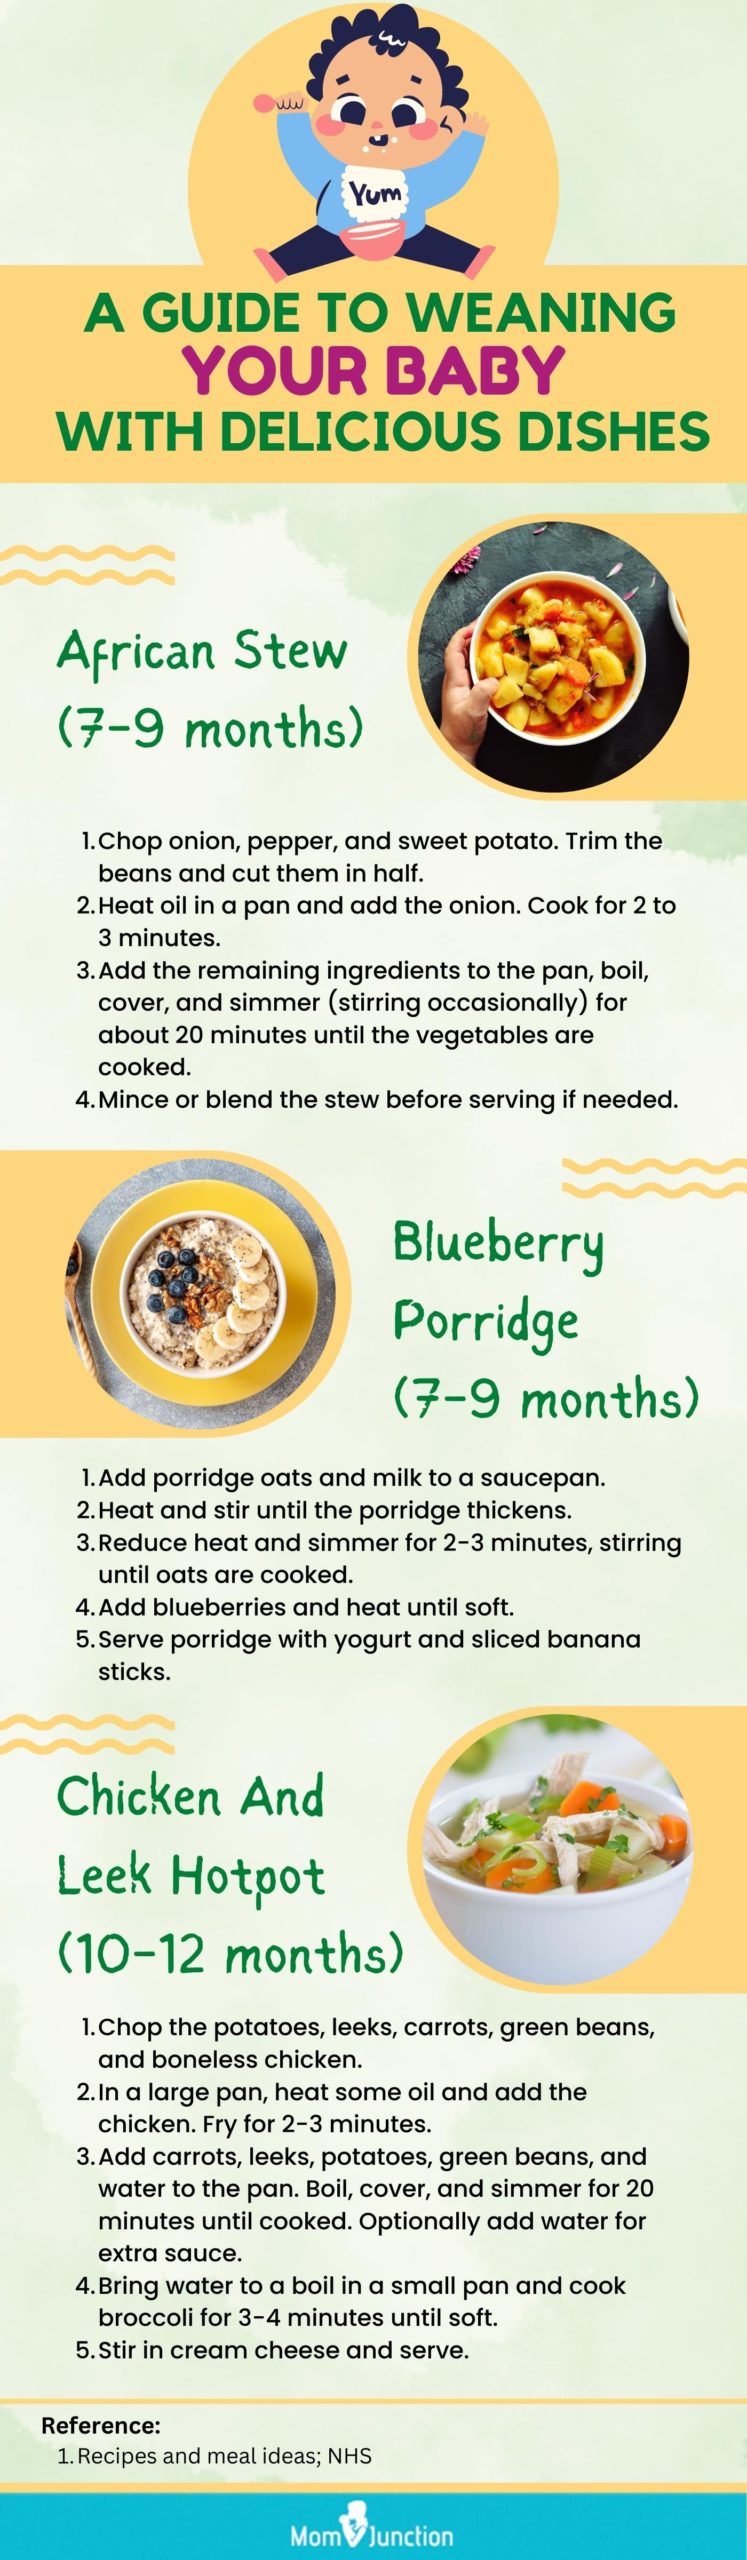 a guide to weaning your baby with delicious dishes (infographic)